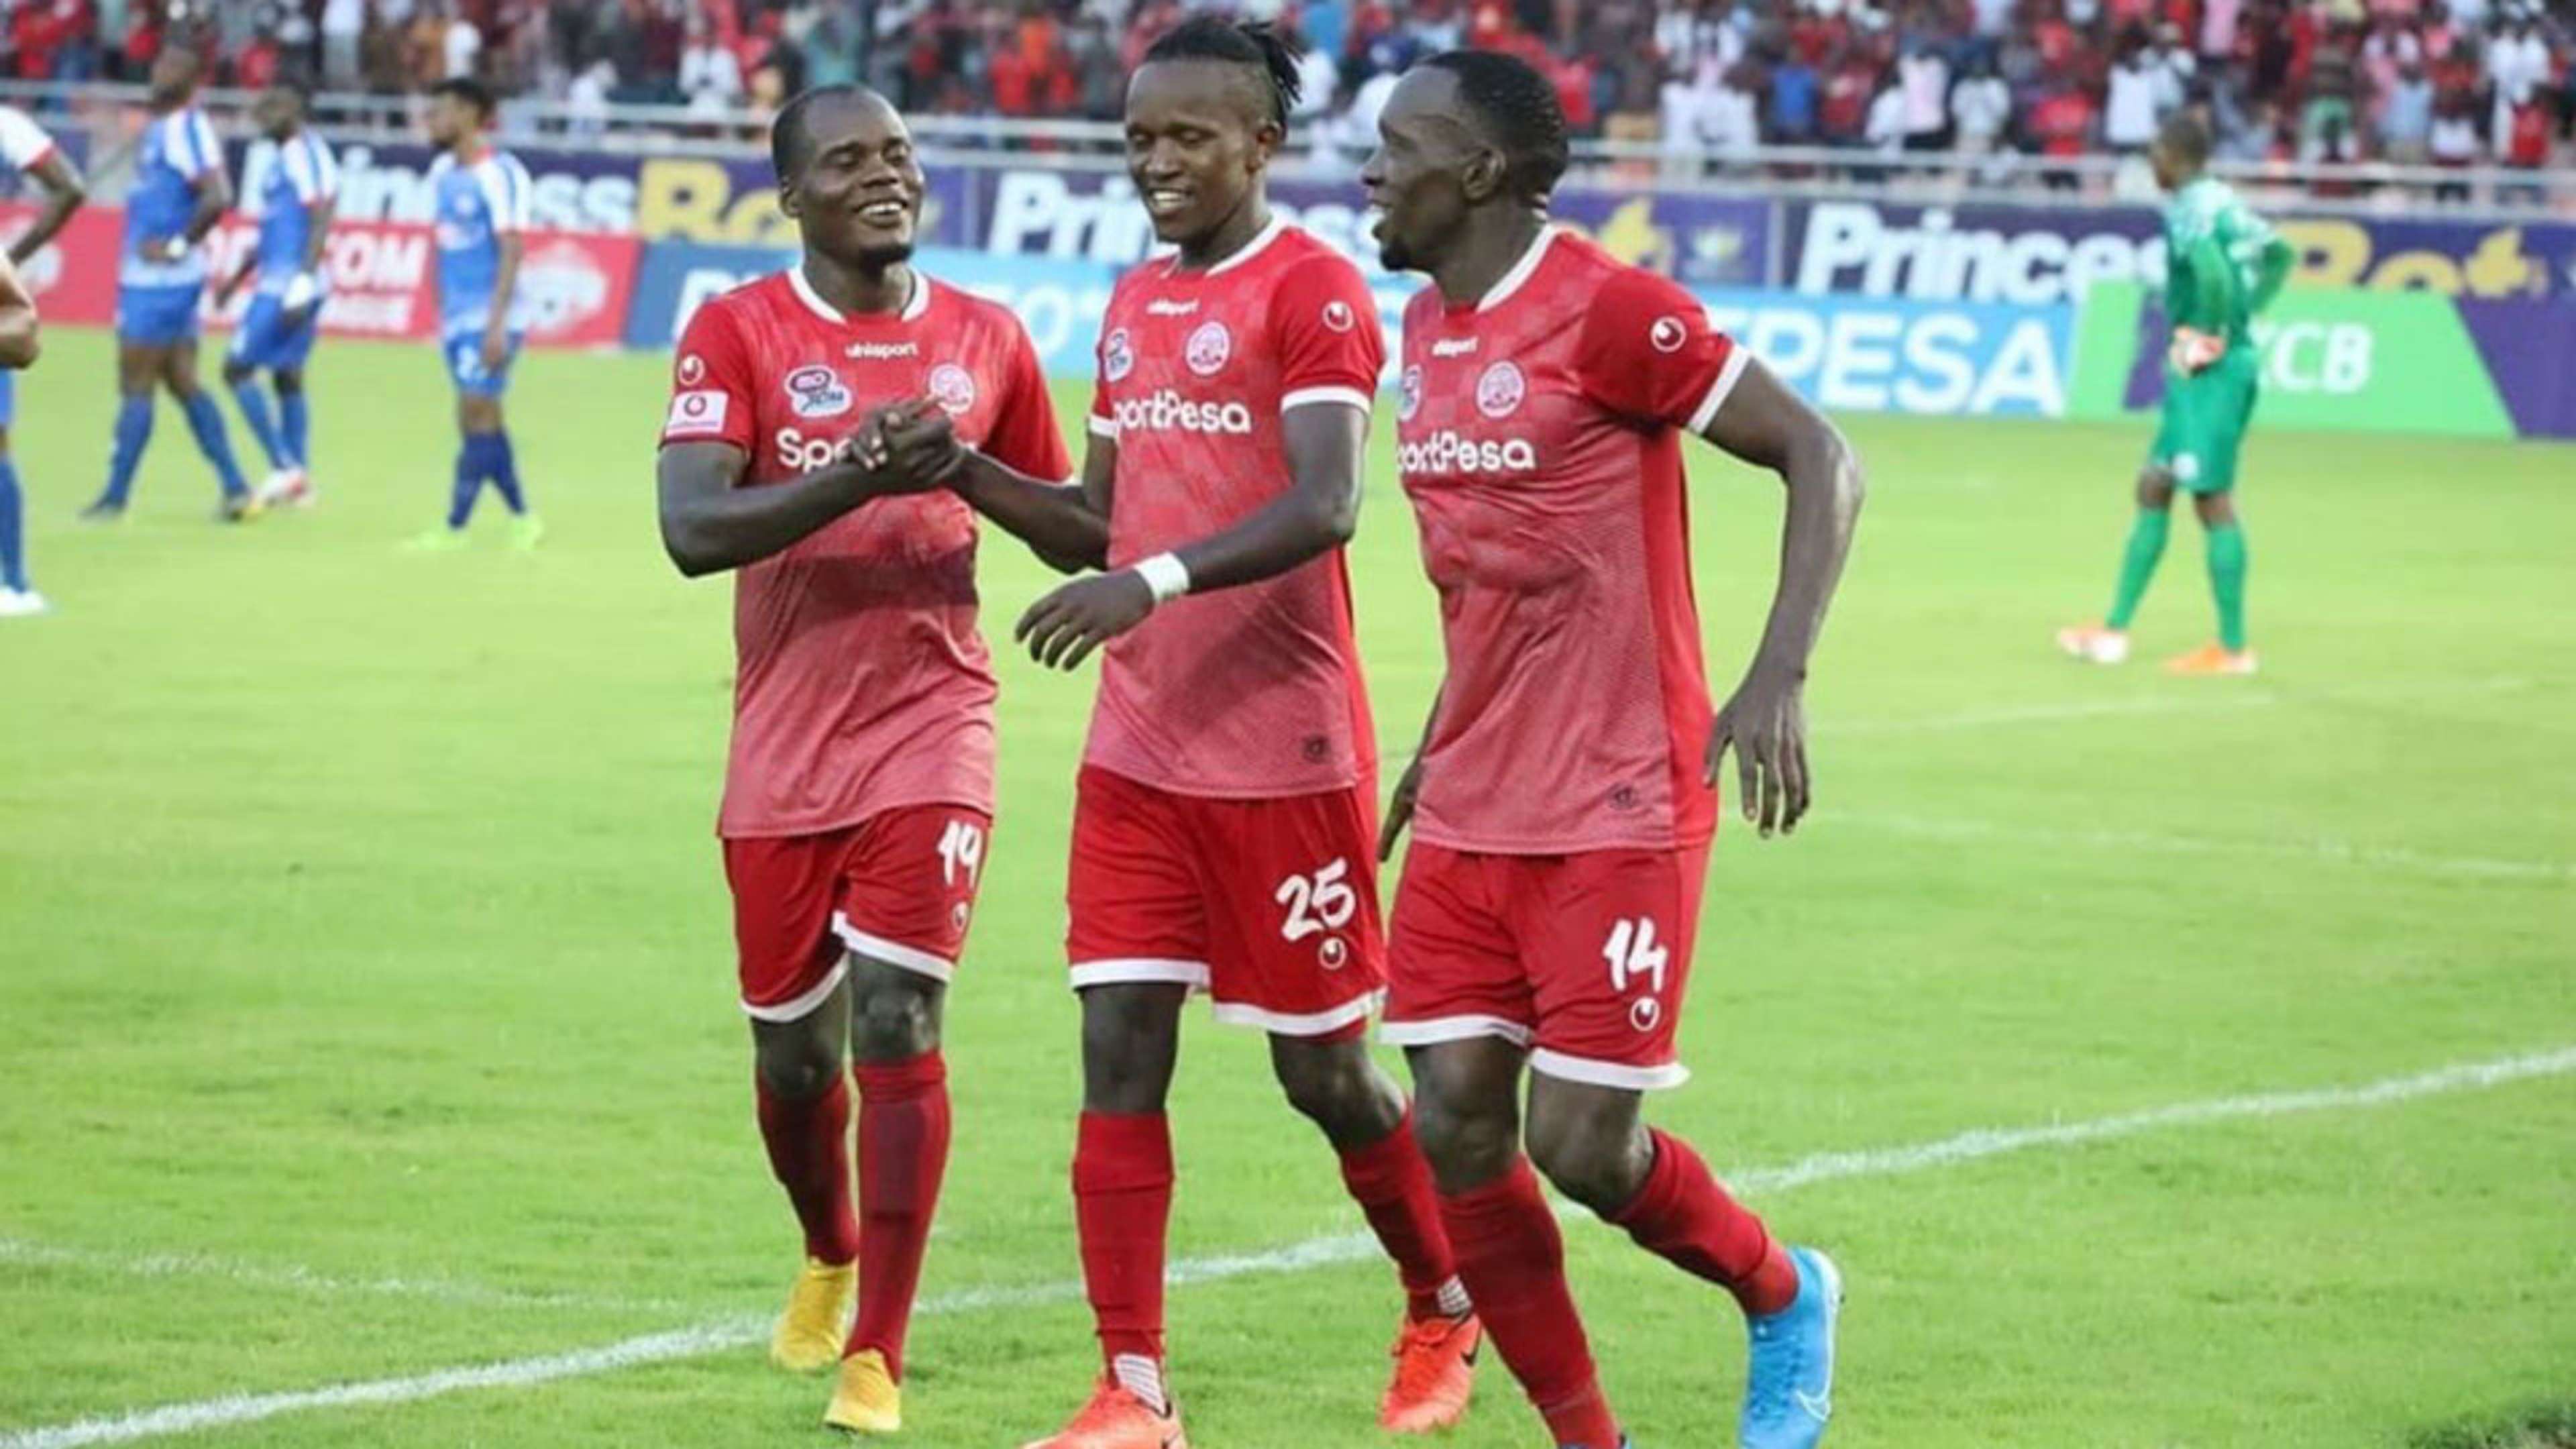 Francis Kahata and Meddie Kagere of Simba SC.